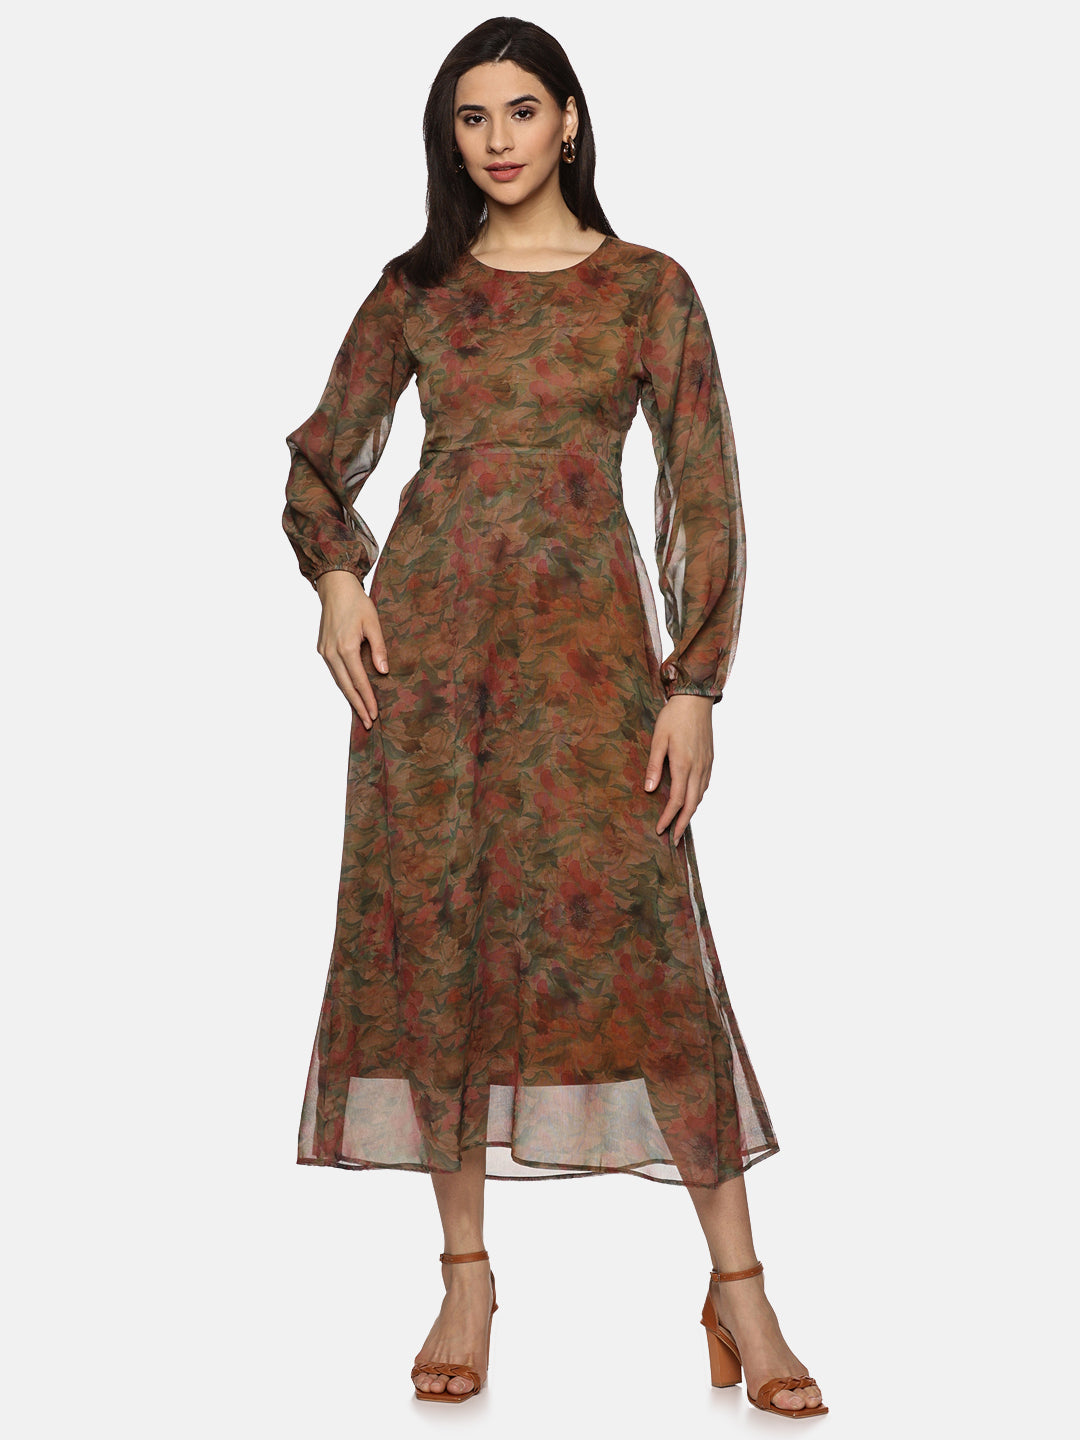 Buy Brown Printed Floral Chiffon Fabric | Cut Out Midaxi Dress Online In India